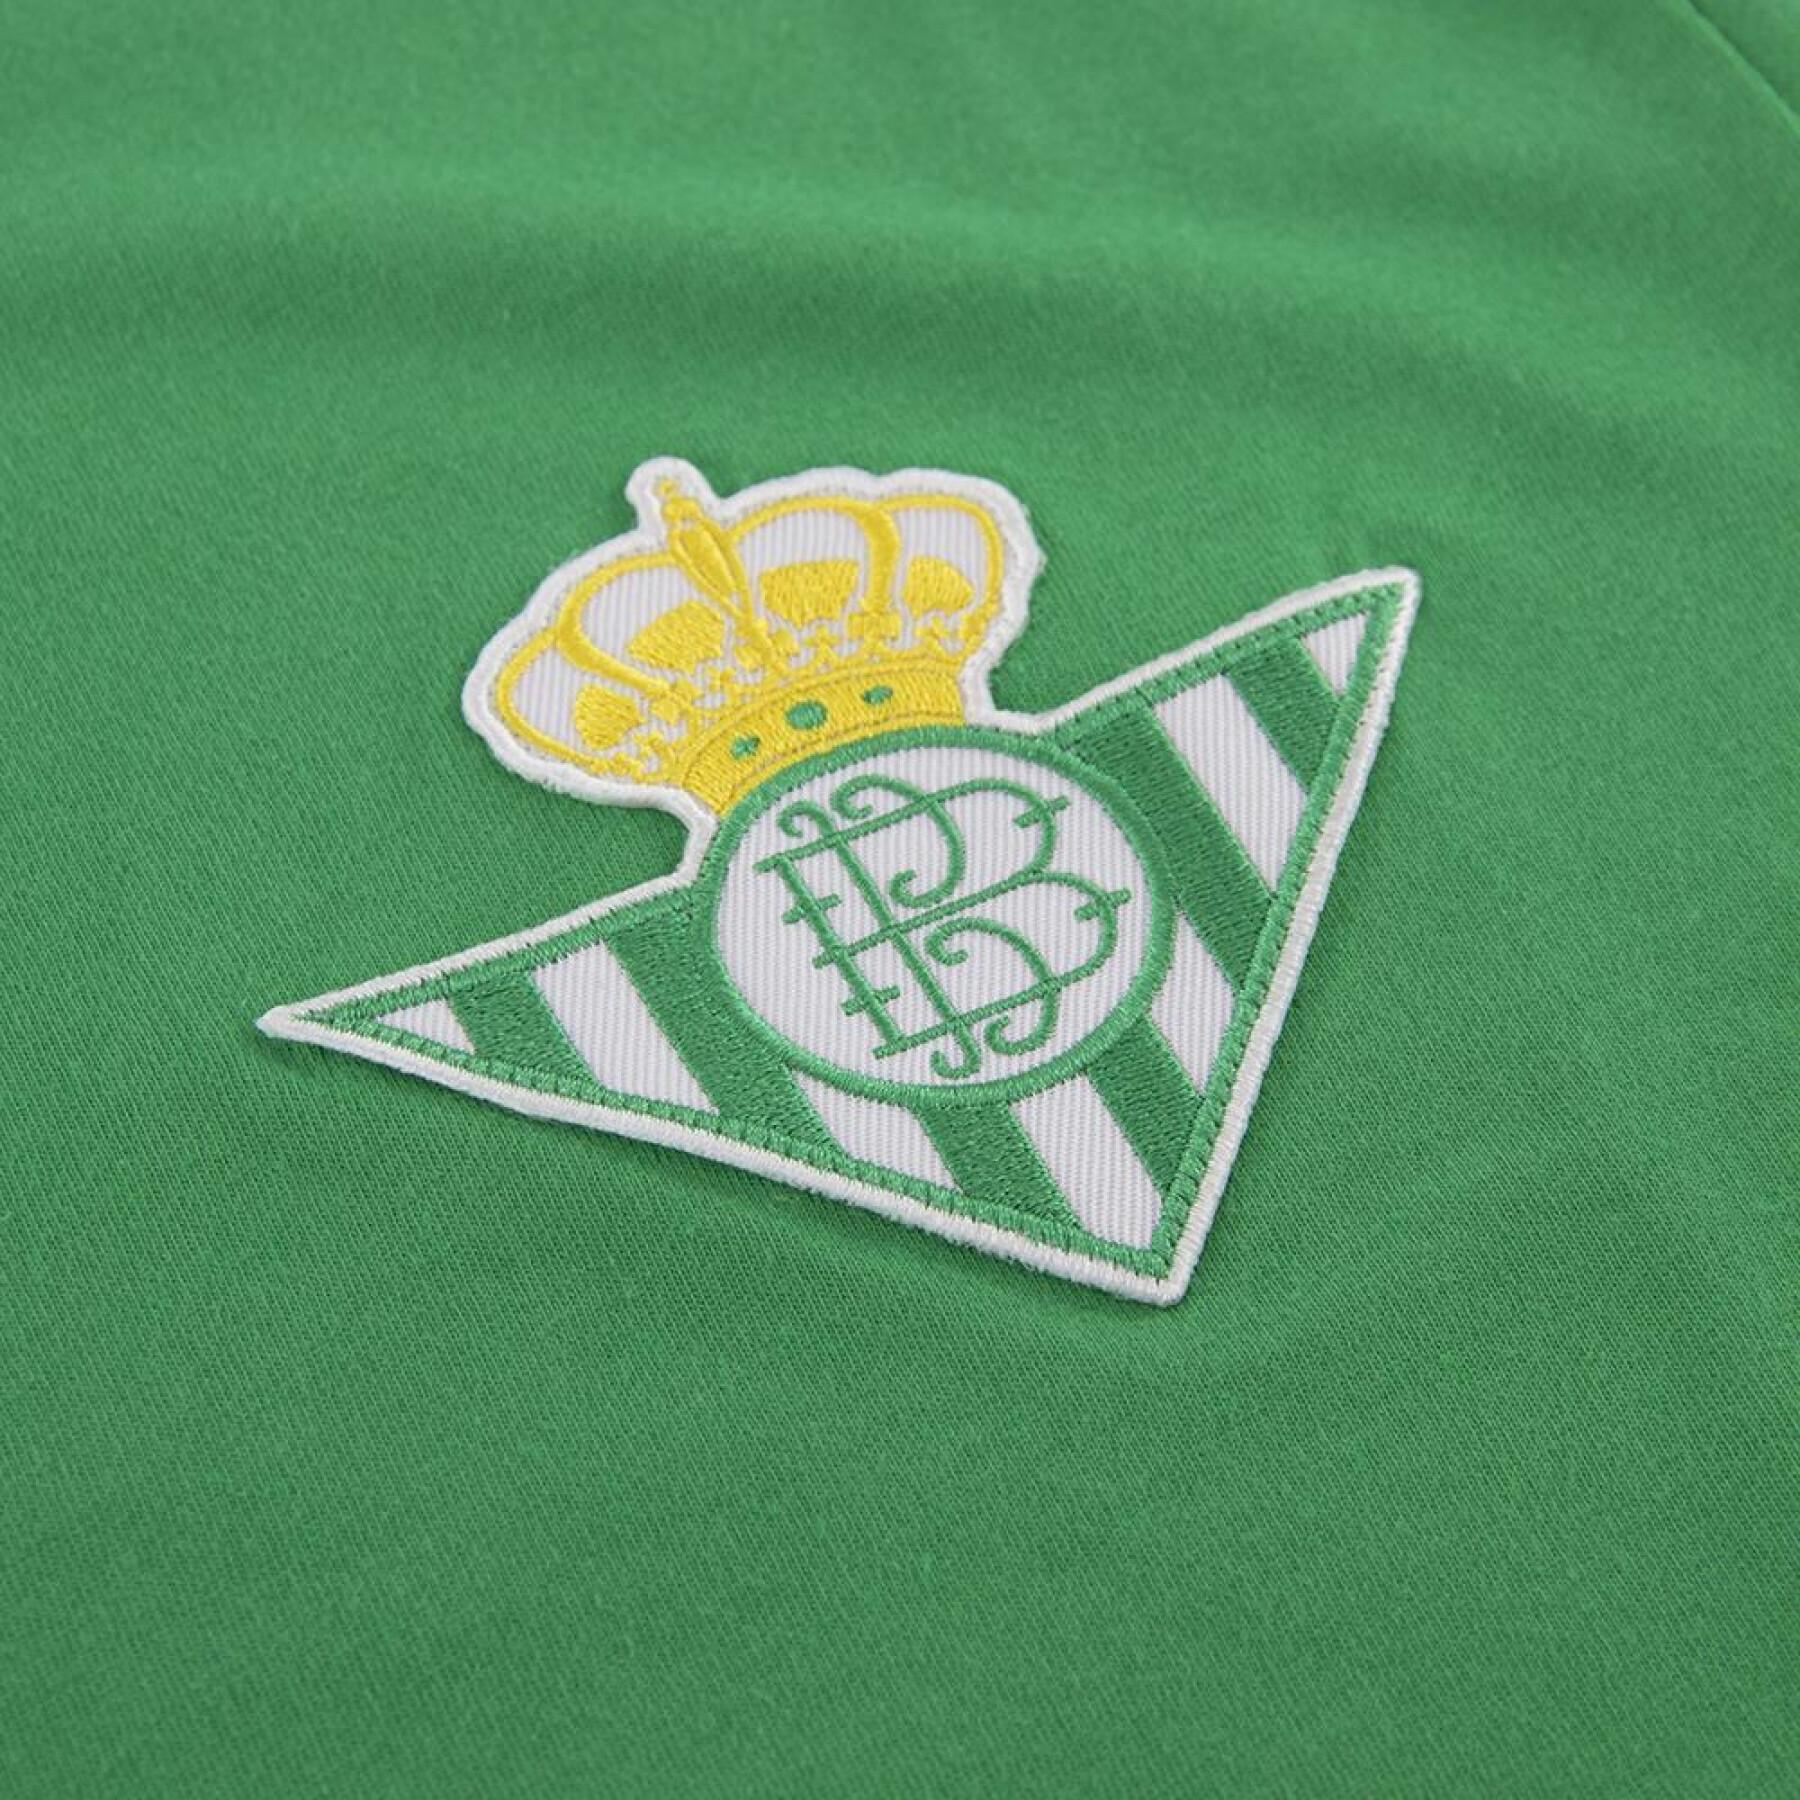 Uitshirt Real Betis Seville 1970's